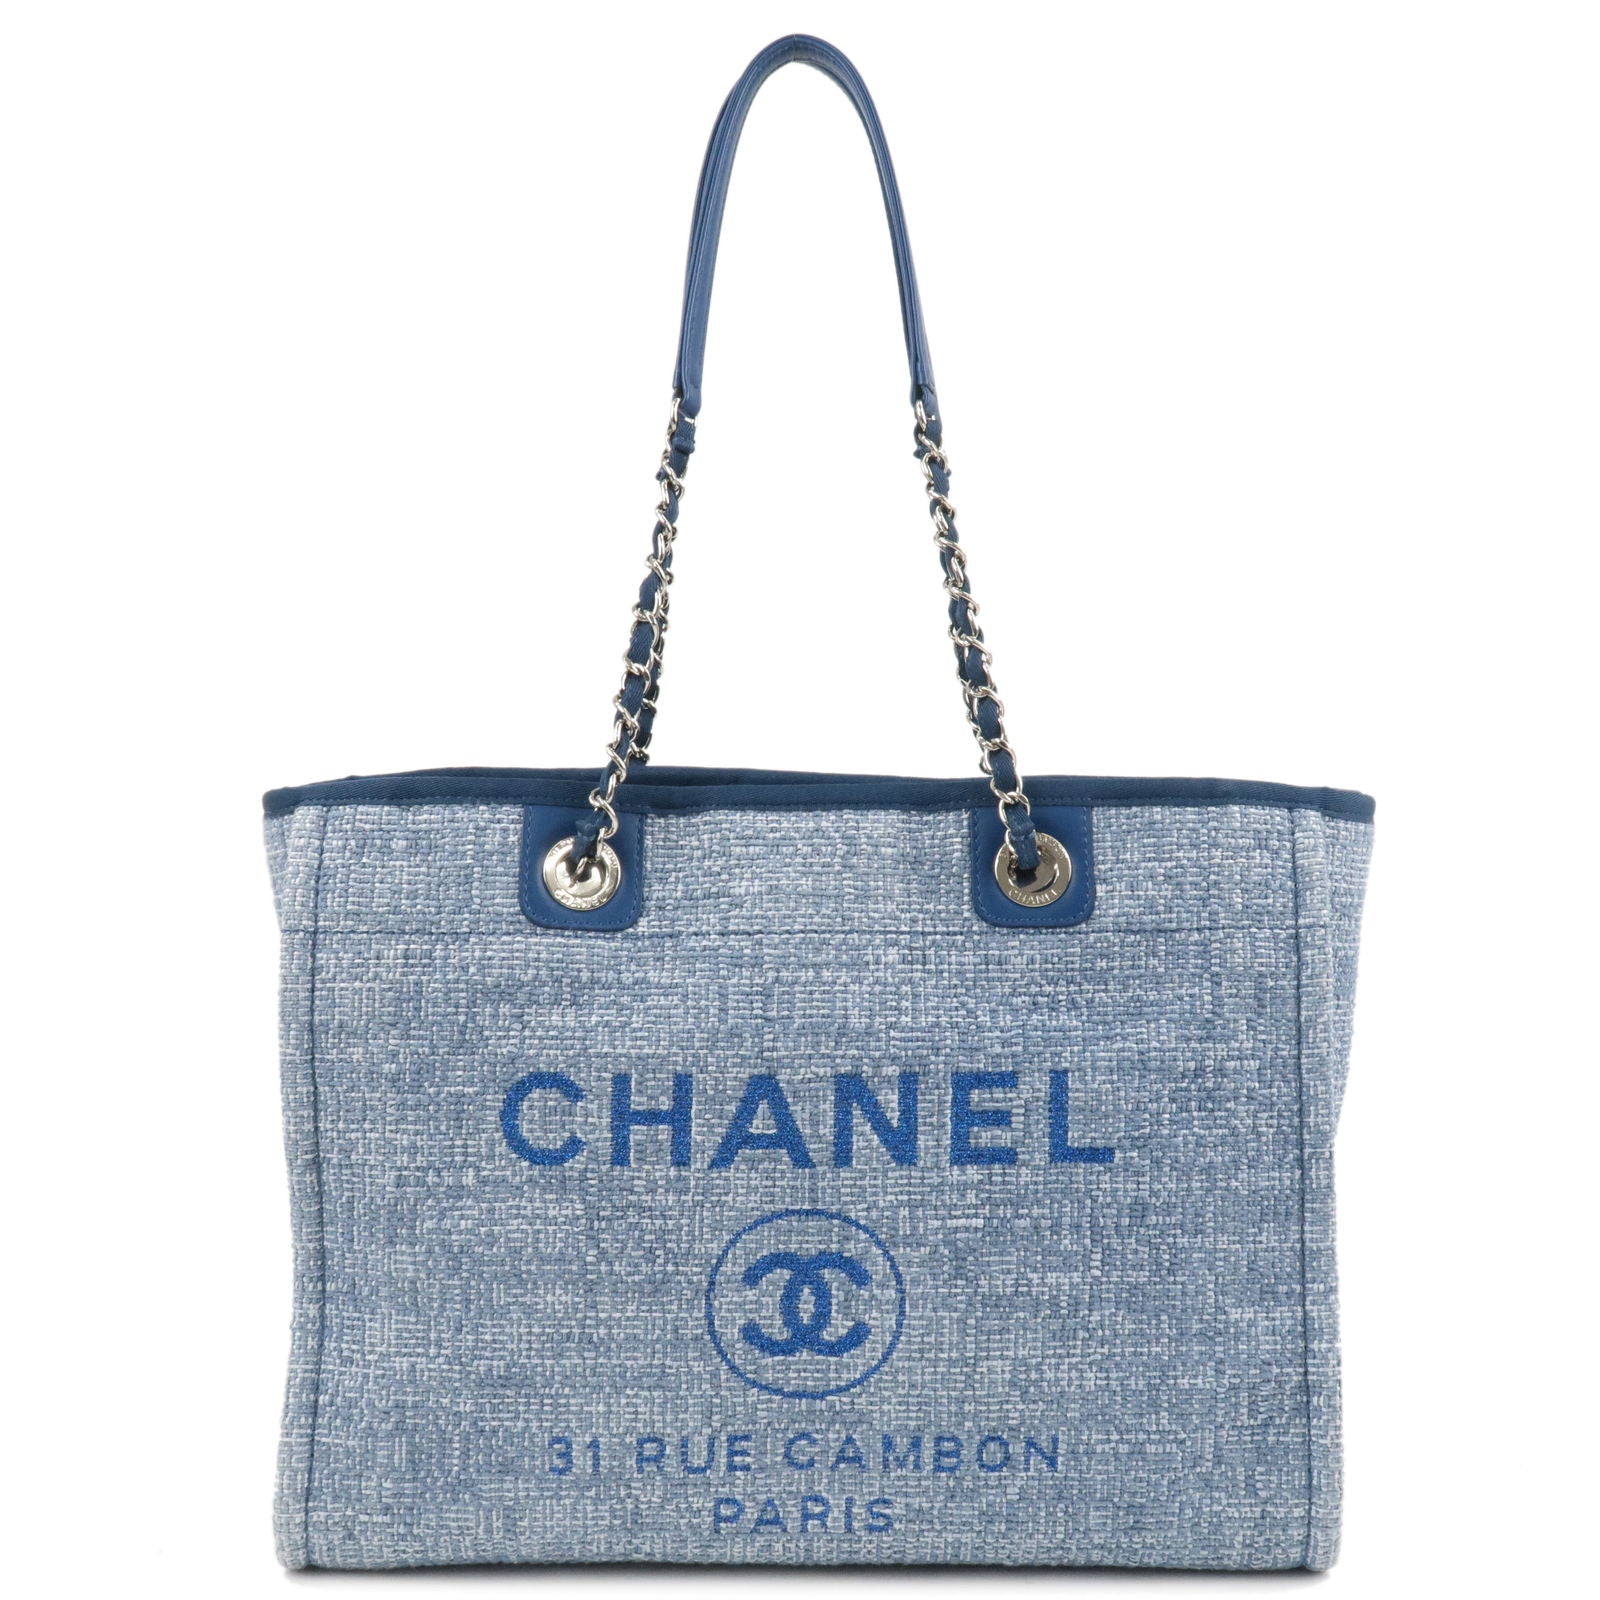 Chanel Deauville leather bag